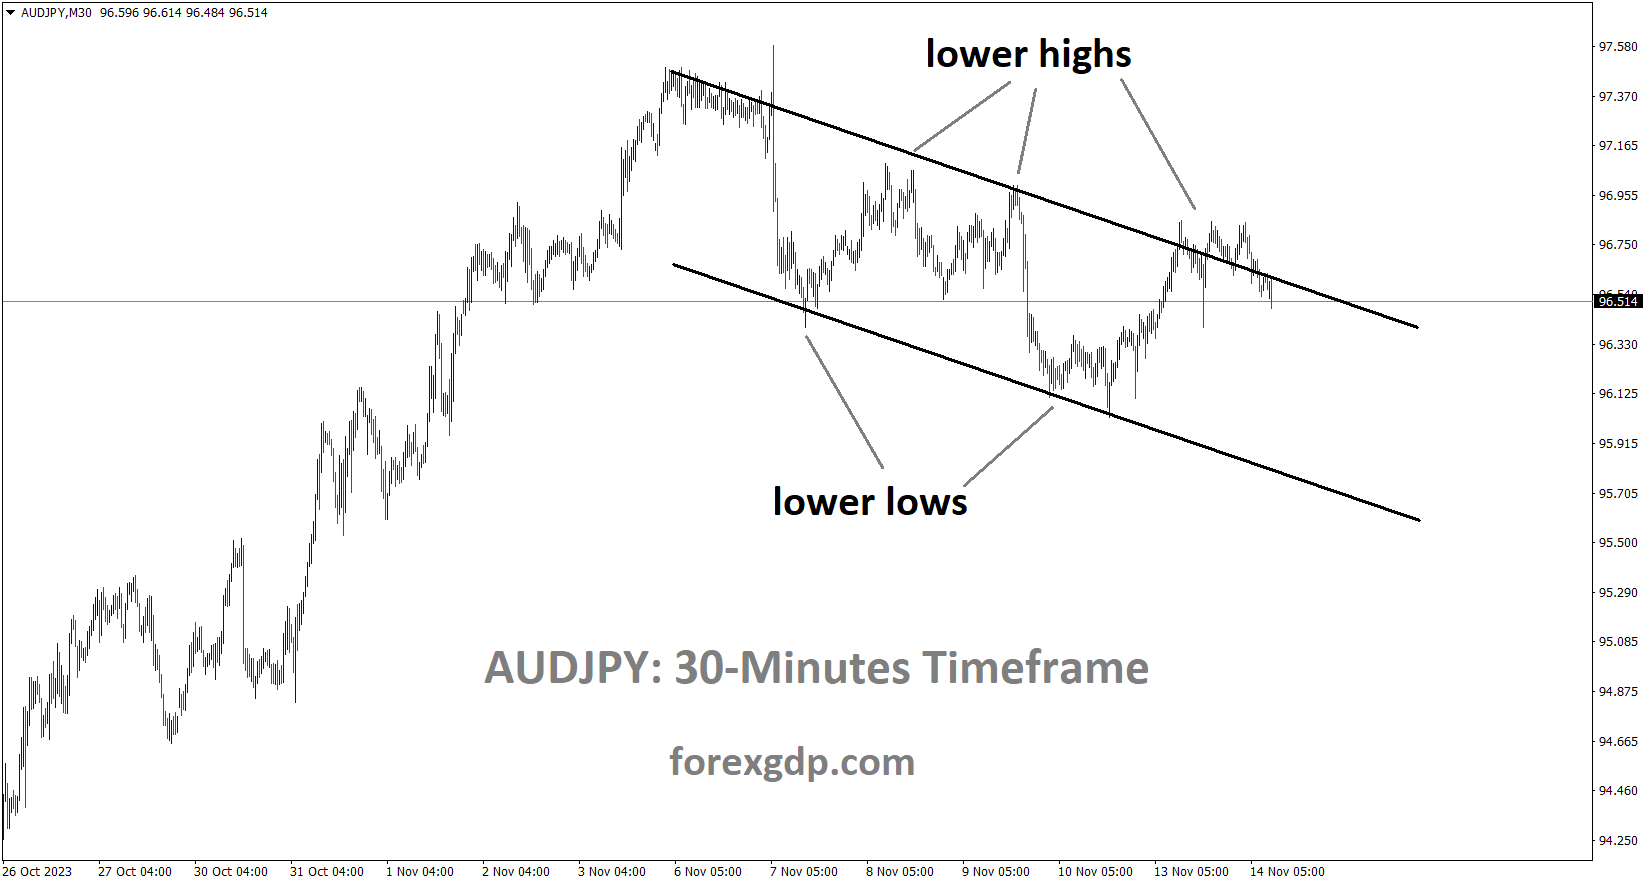 AUDJPY is moving in the Descending channel and the market has fallen from the lower high area of the channel